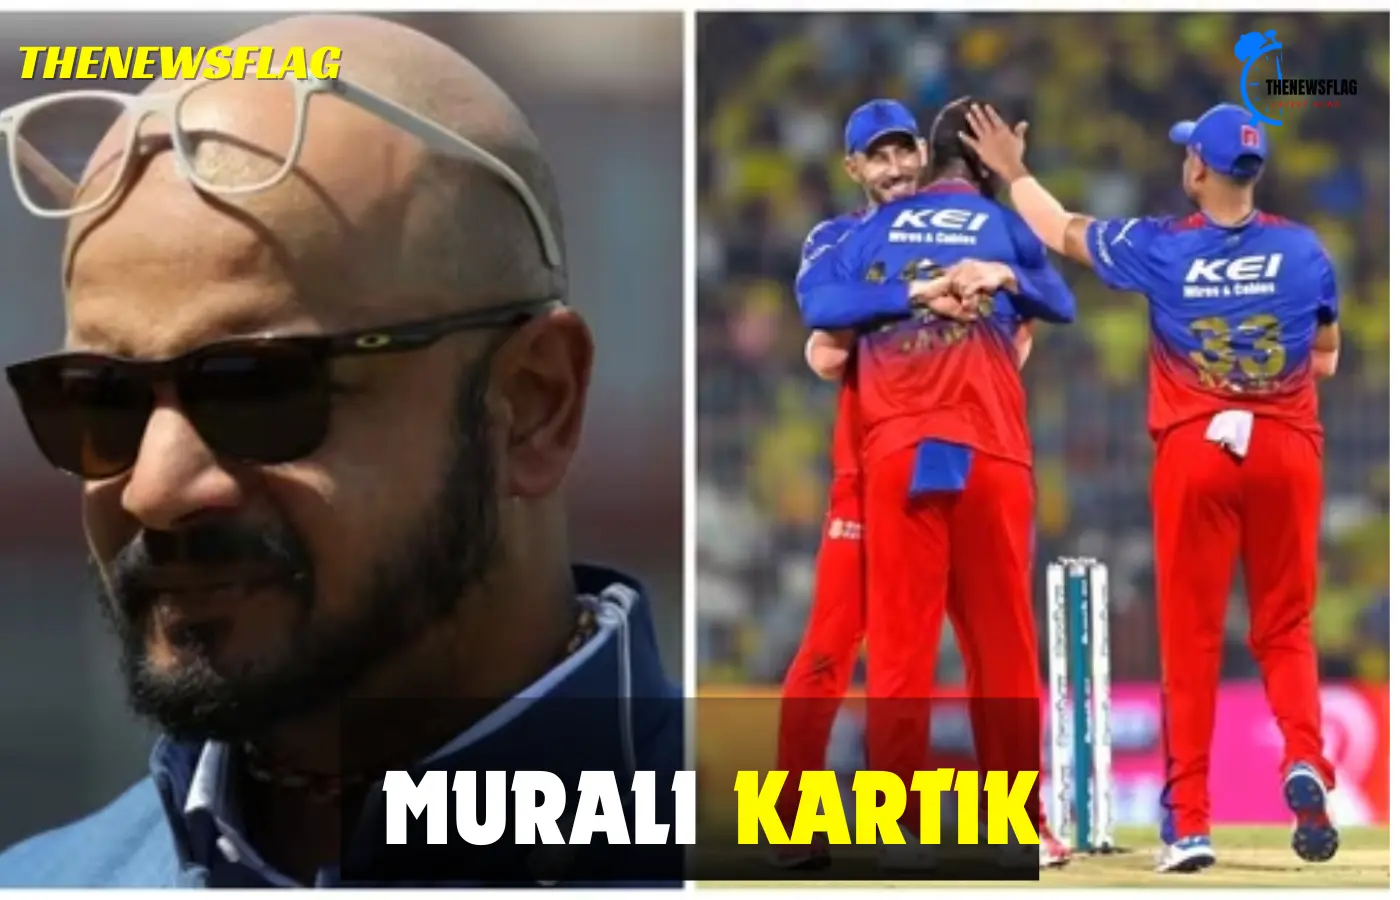 Yash Dayal was the target of a controversial'someone's trash..' comment made by Murali Kartik during the RCB vs. PBKS IPL match.